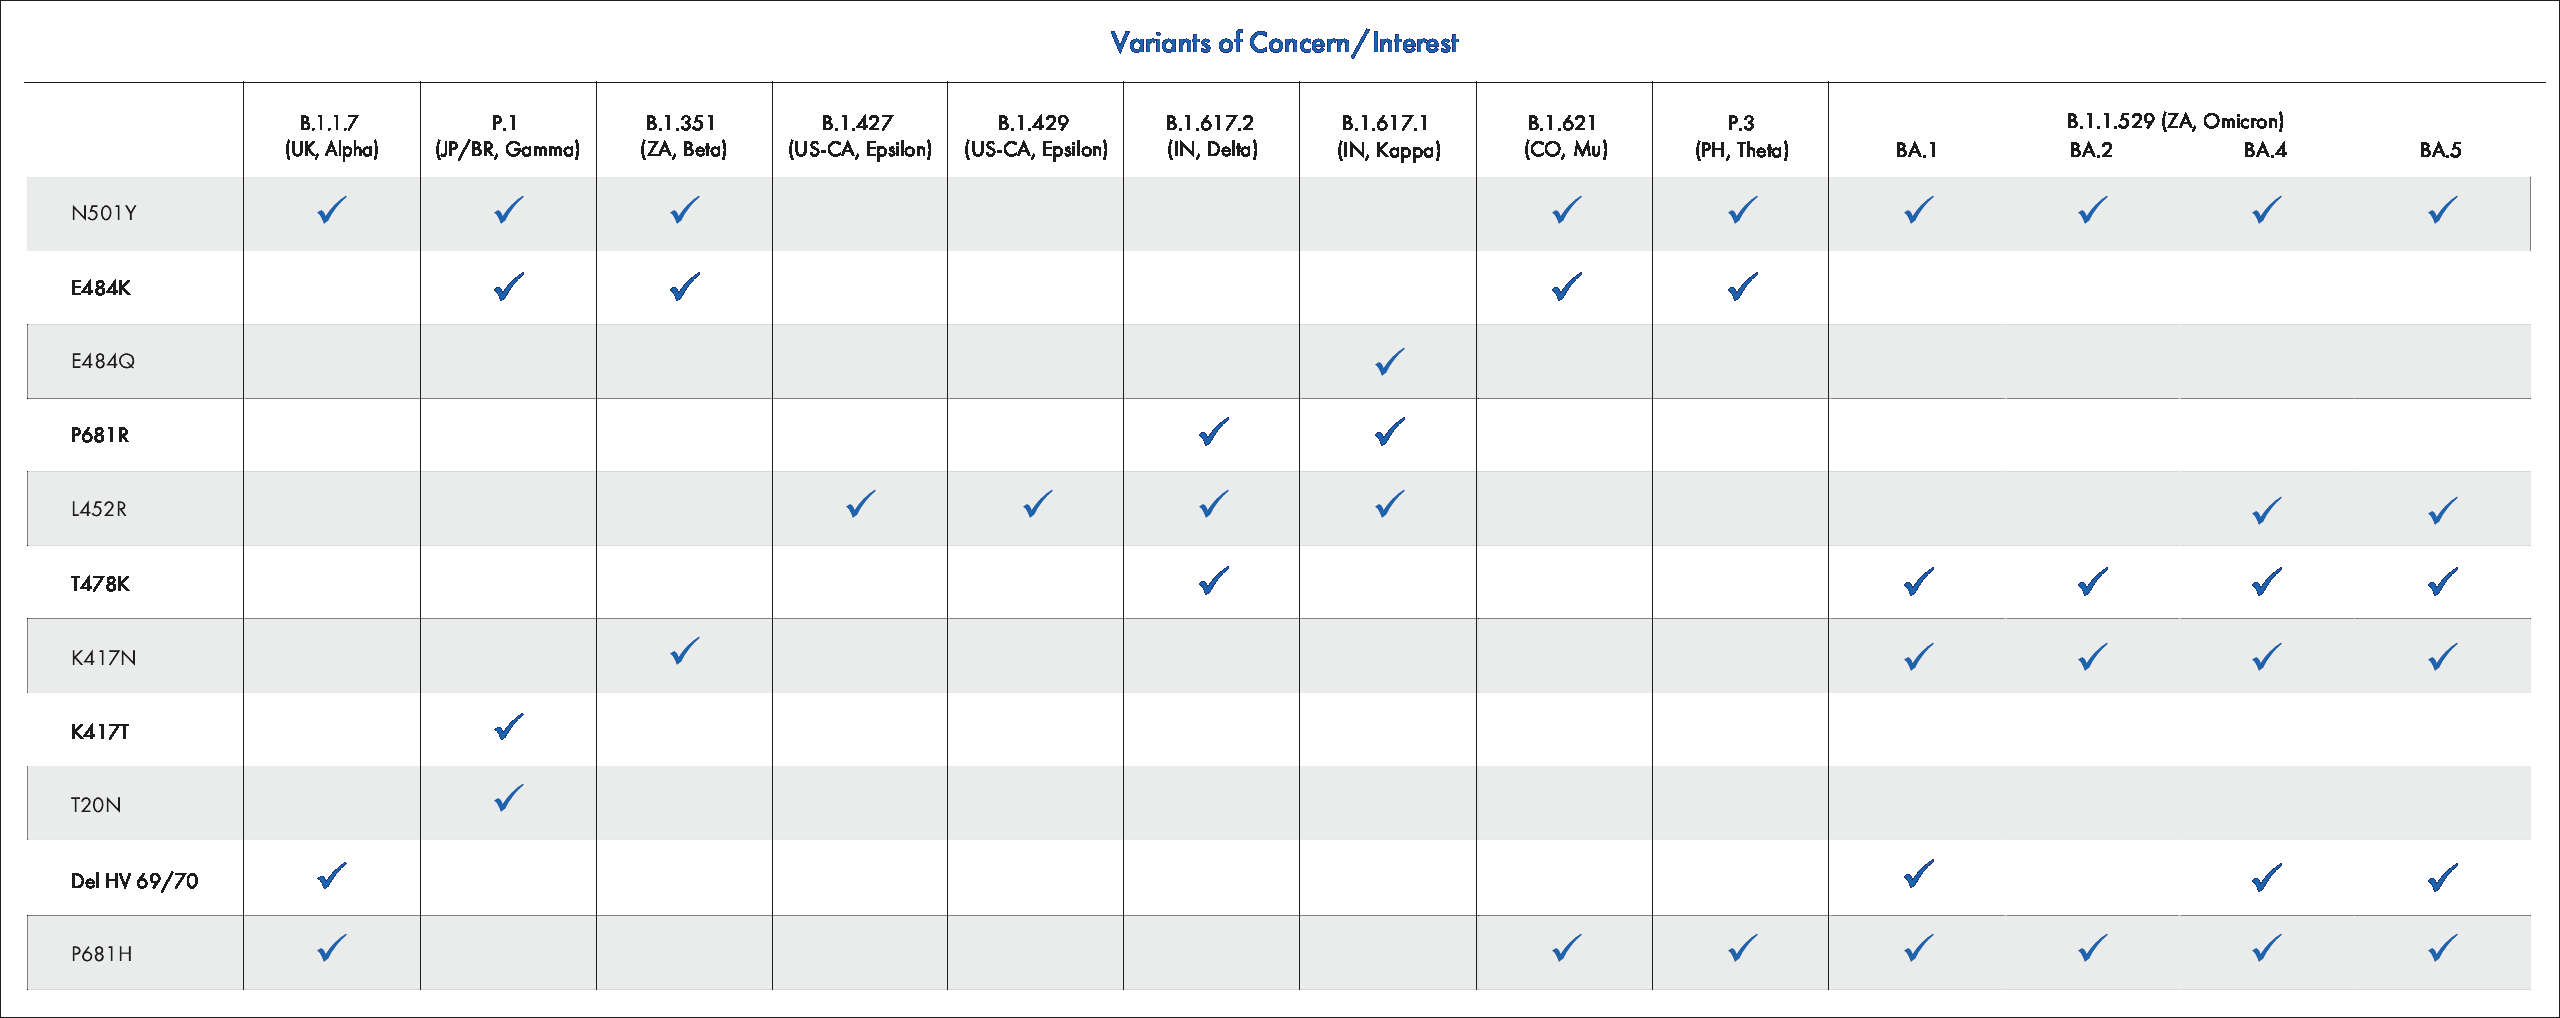 Table of variants of concern/interest